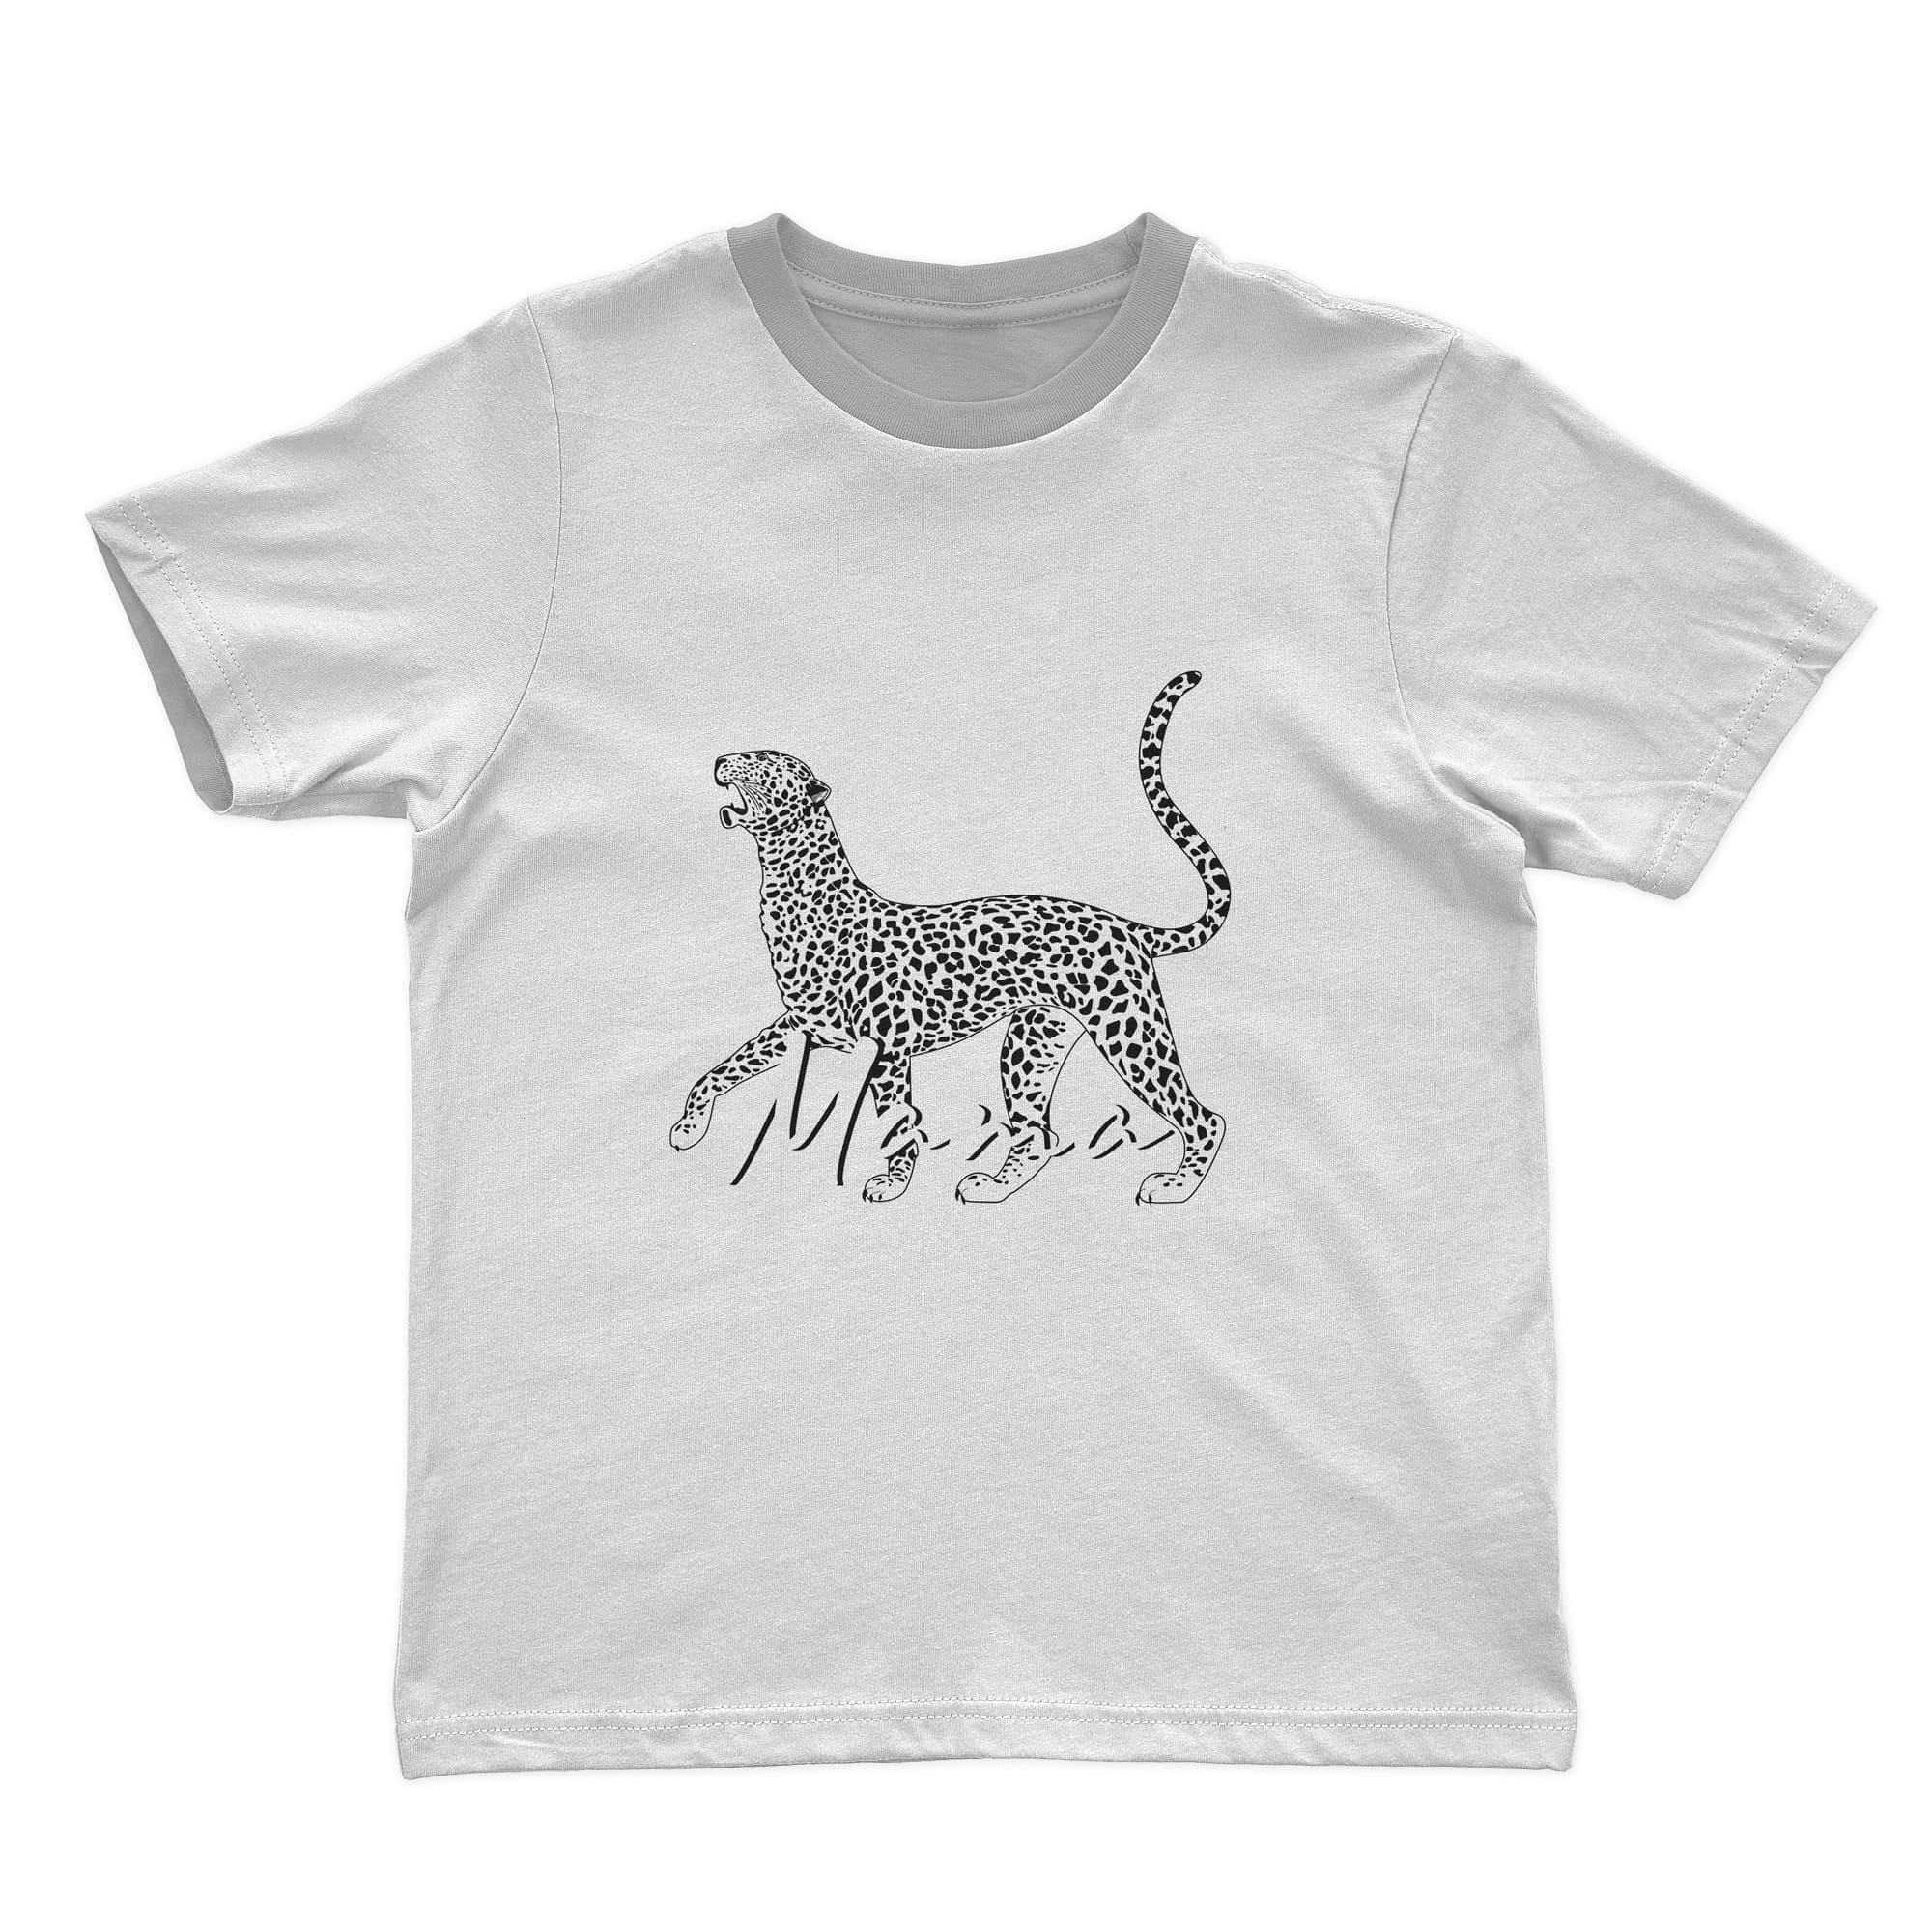 A picture of a leopard mother on a white T-shirt.